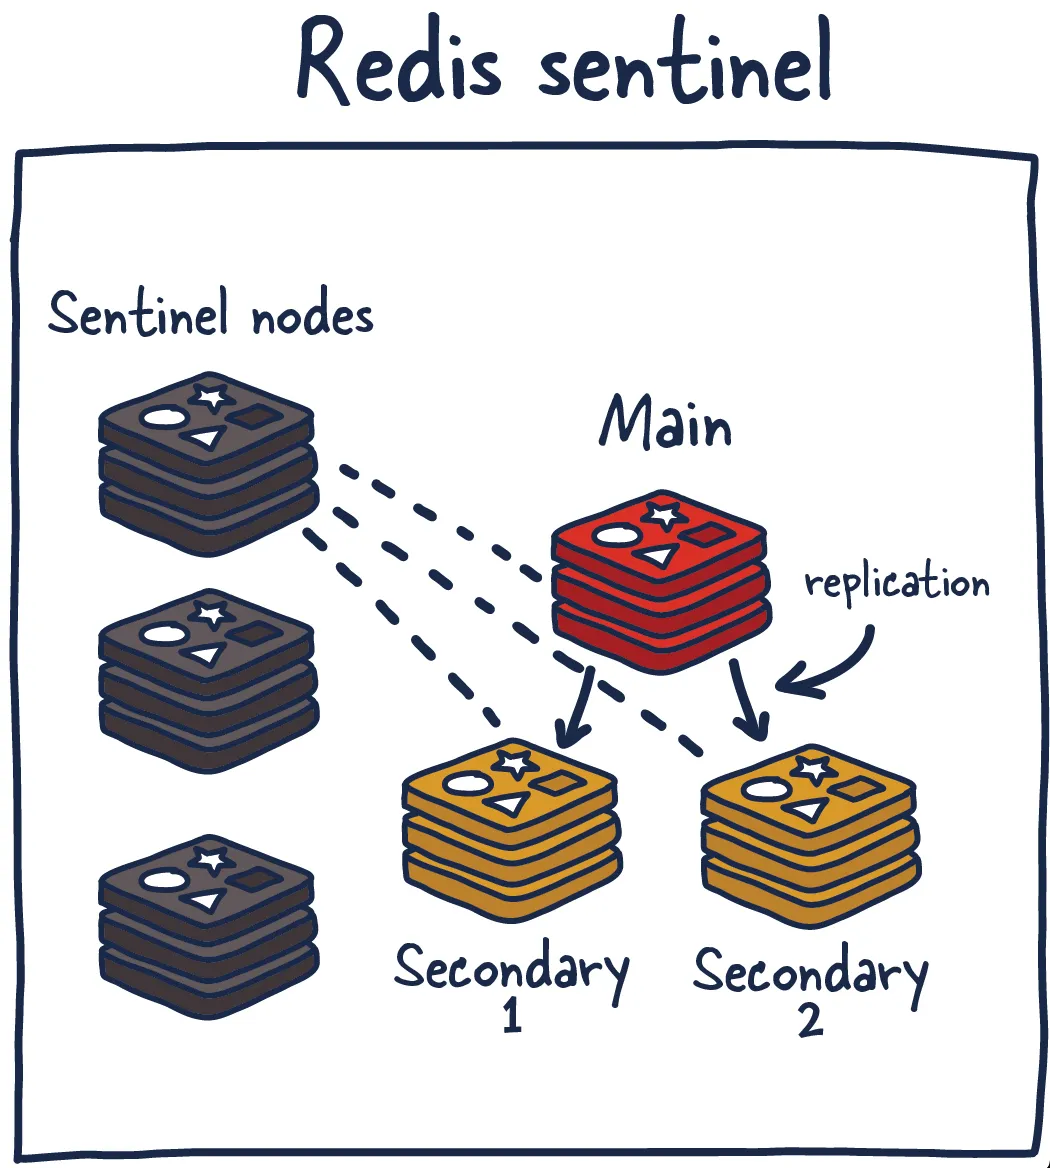 Redis Sentinel deployment - extra monitoring/dashed lines from other sentinel nodes are left out for clarity